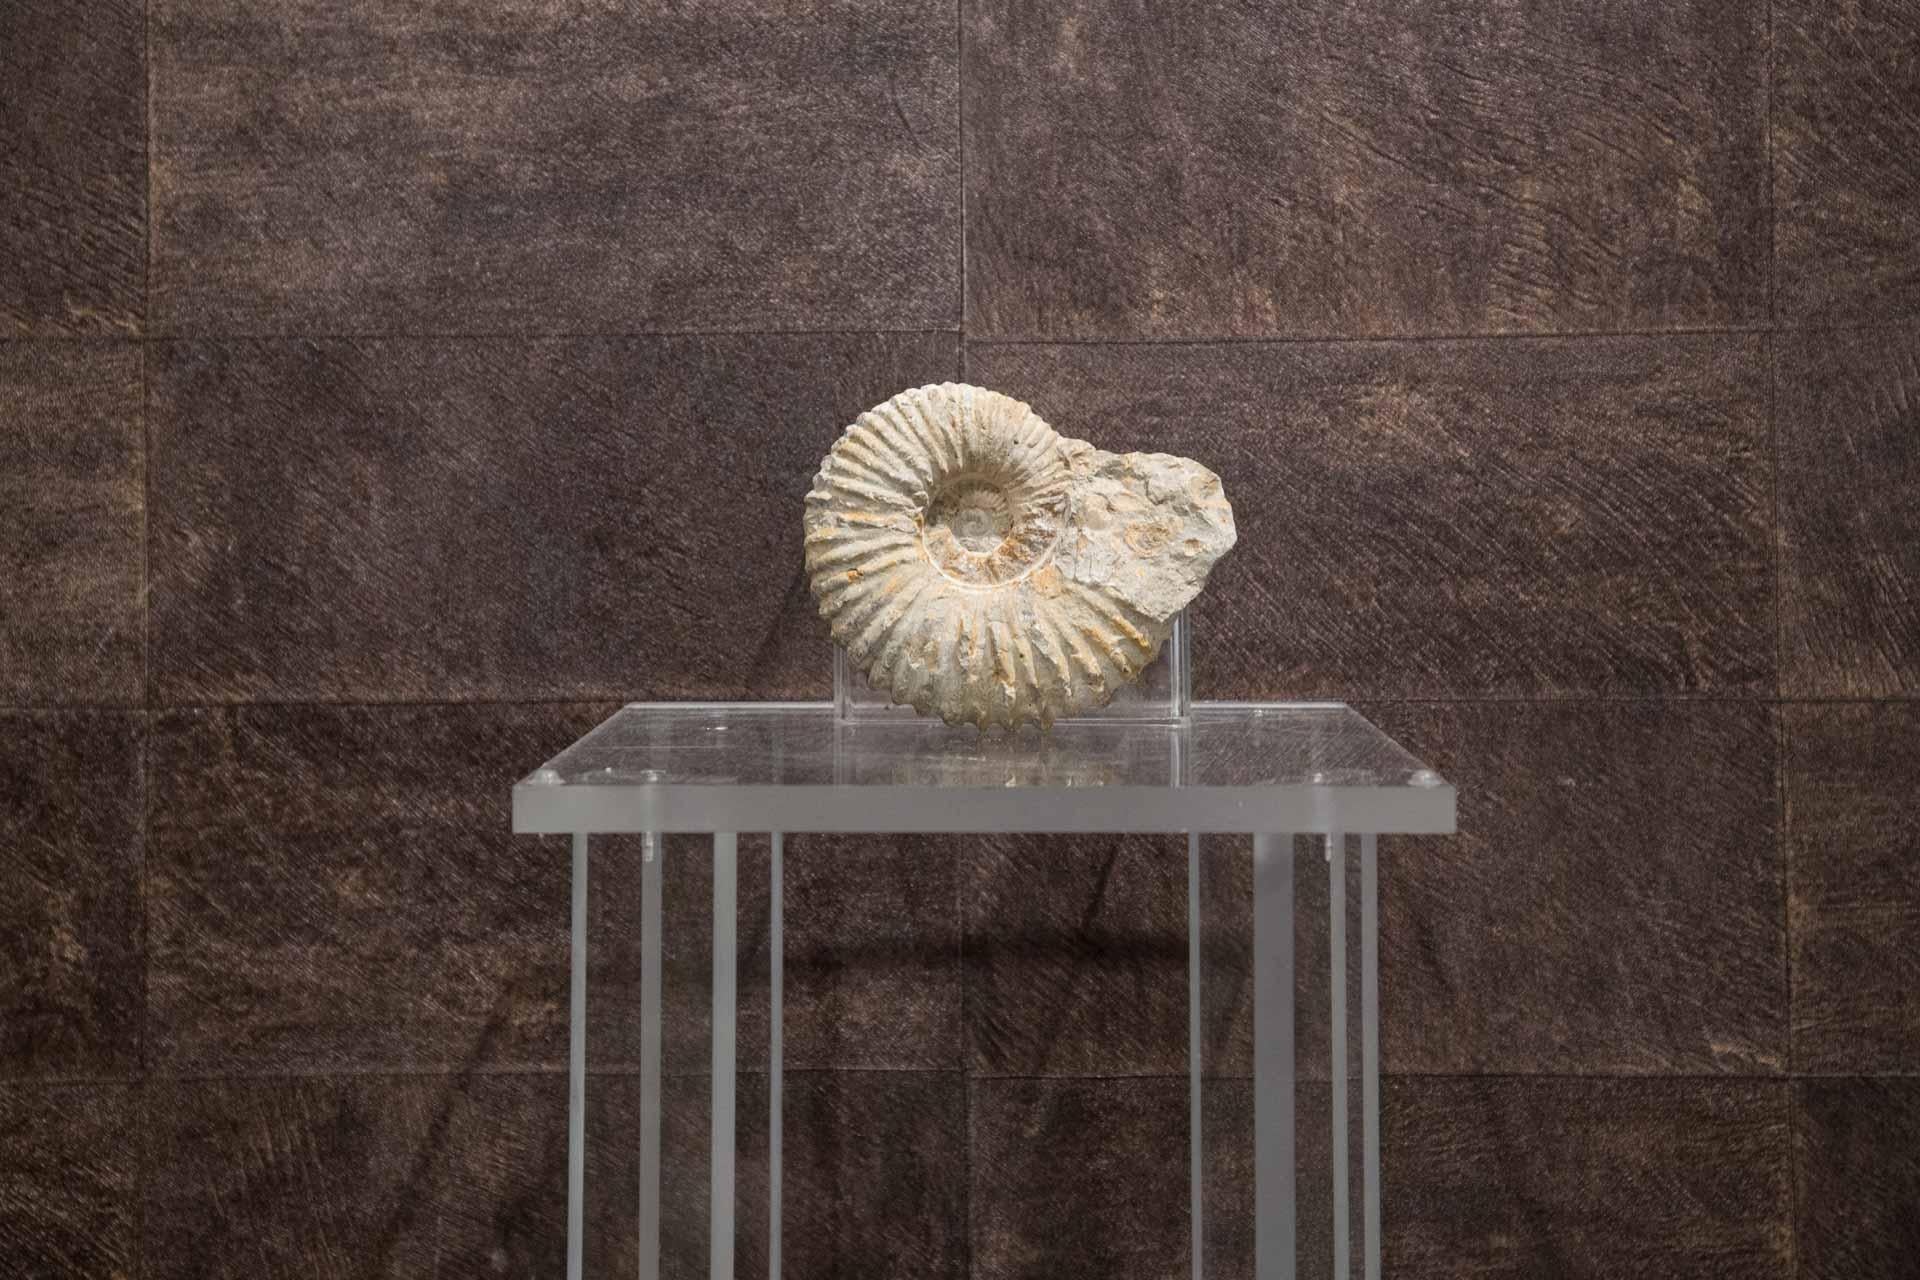 Albian Type Ammonite Mineral
Original specimen of Albian Type Ammonites Mineral.
Cretaceous Era 
Origin Morocco

Every item of our Gallery, upon request, is accompanied by a certificate of authenticity issued by Sabrina Egidi official Expert in